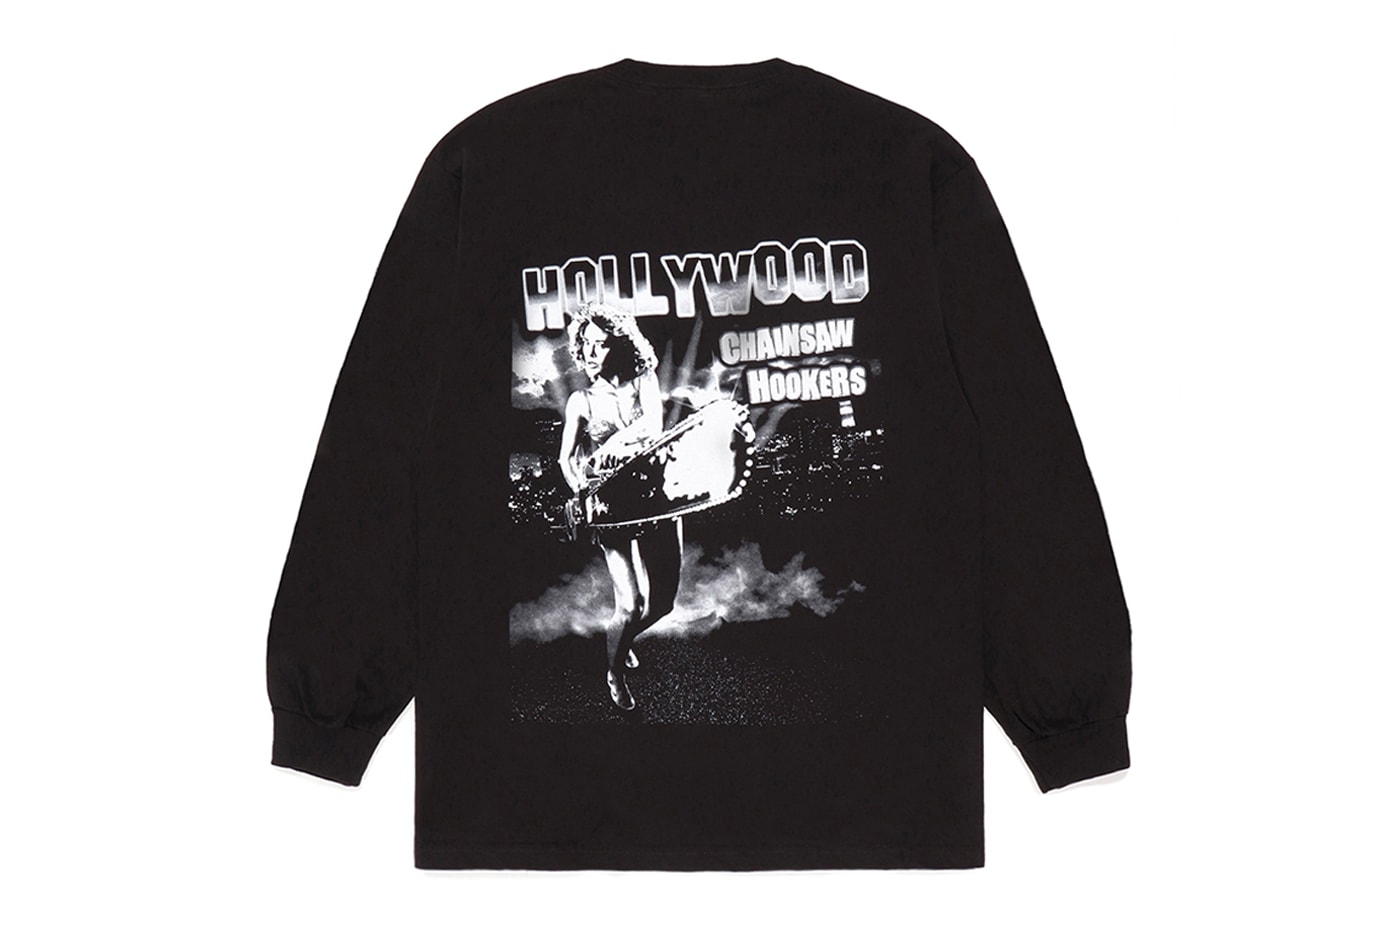 WACKO MARIA Releases Capsule Inspired By '80s Horror Film 'Hollywood Chainsaw Hookers' release info american black comedy slasher film fred olen ray gunnar hanse linnea quigley